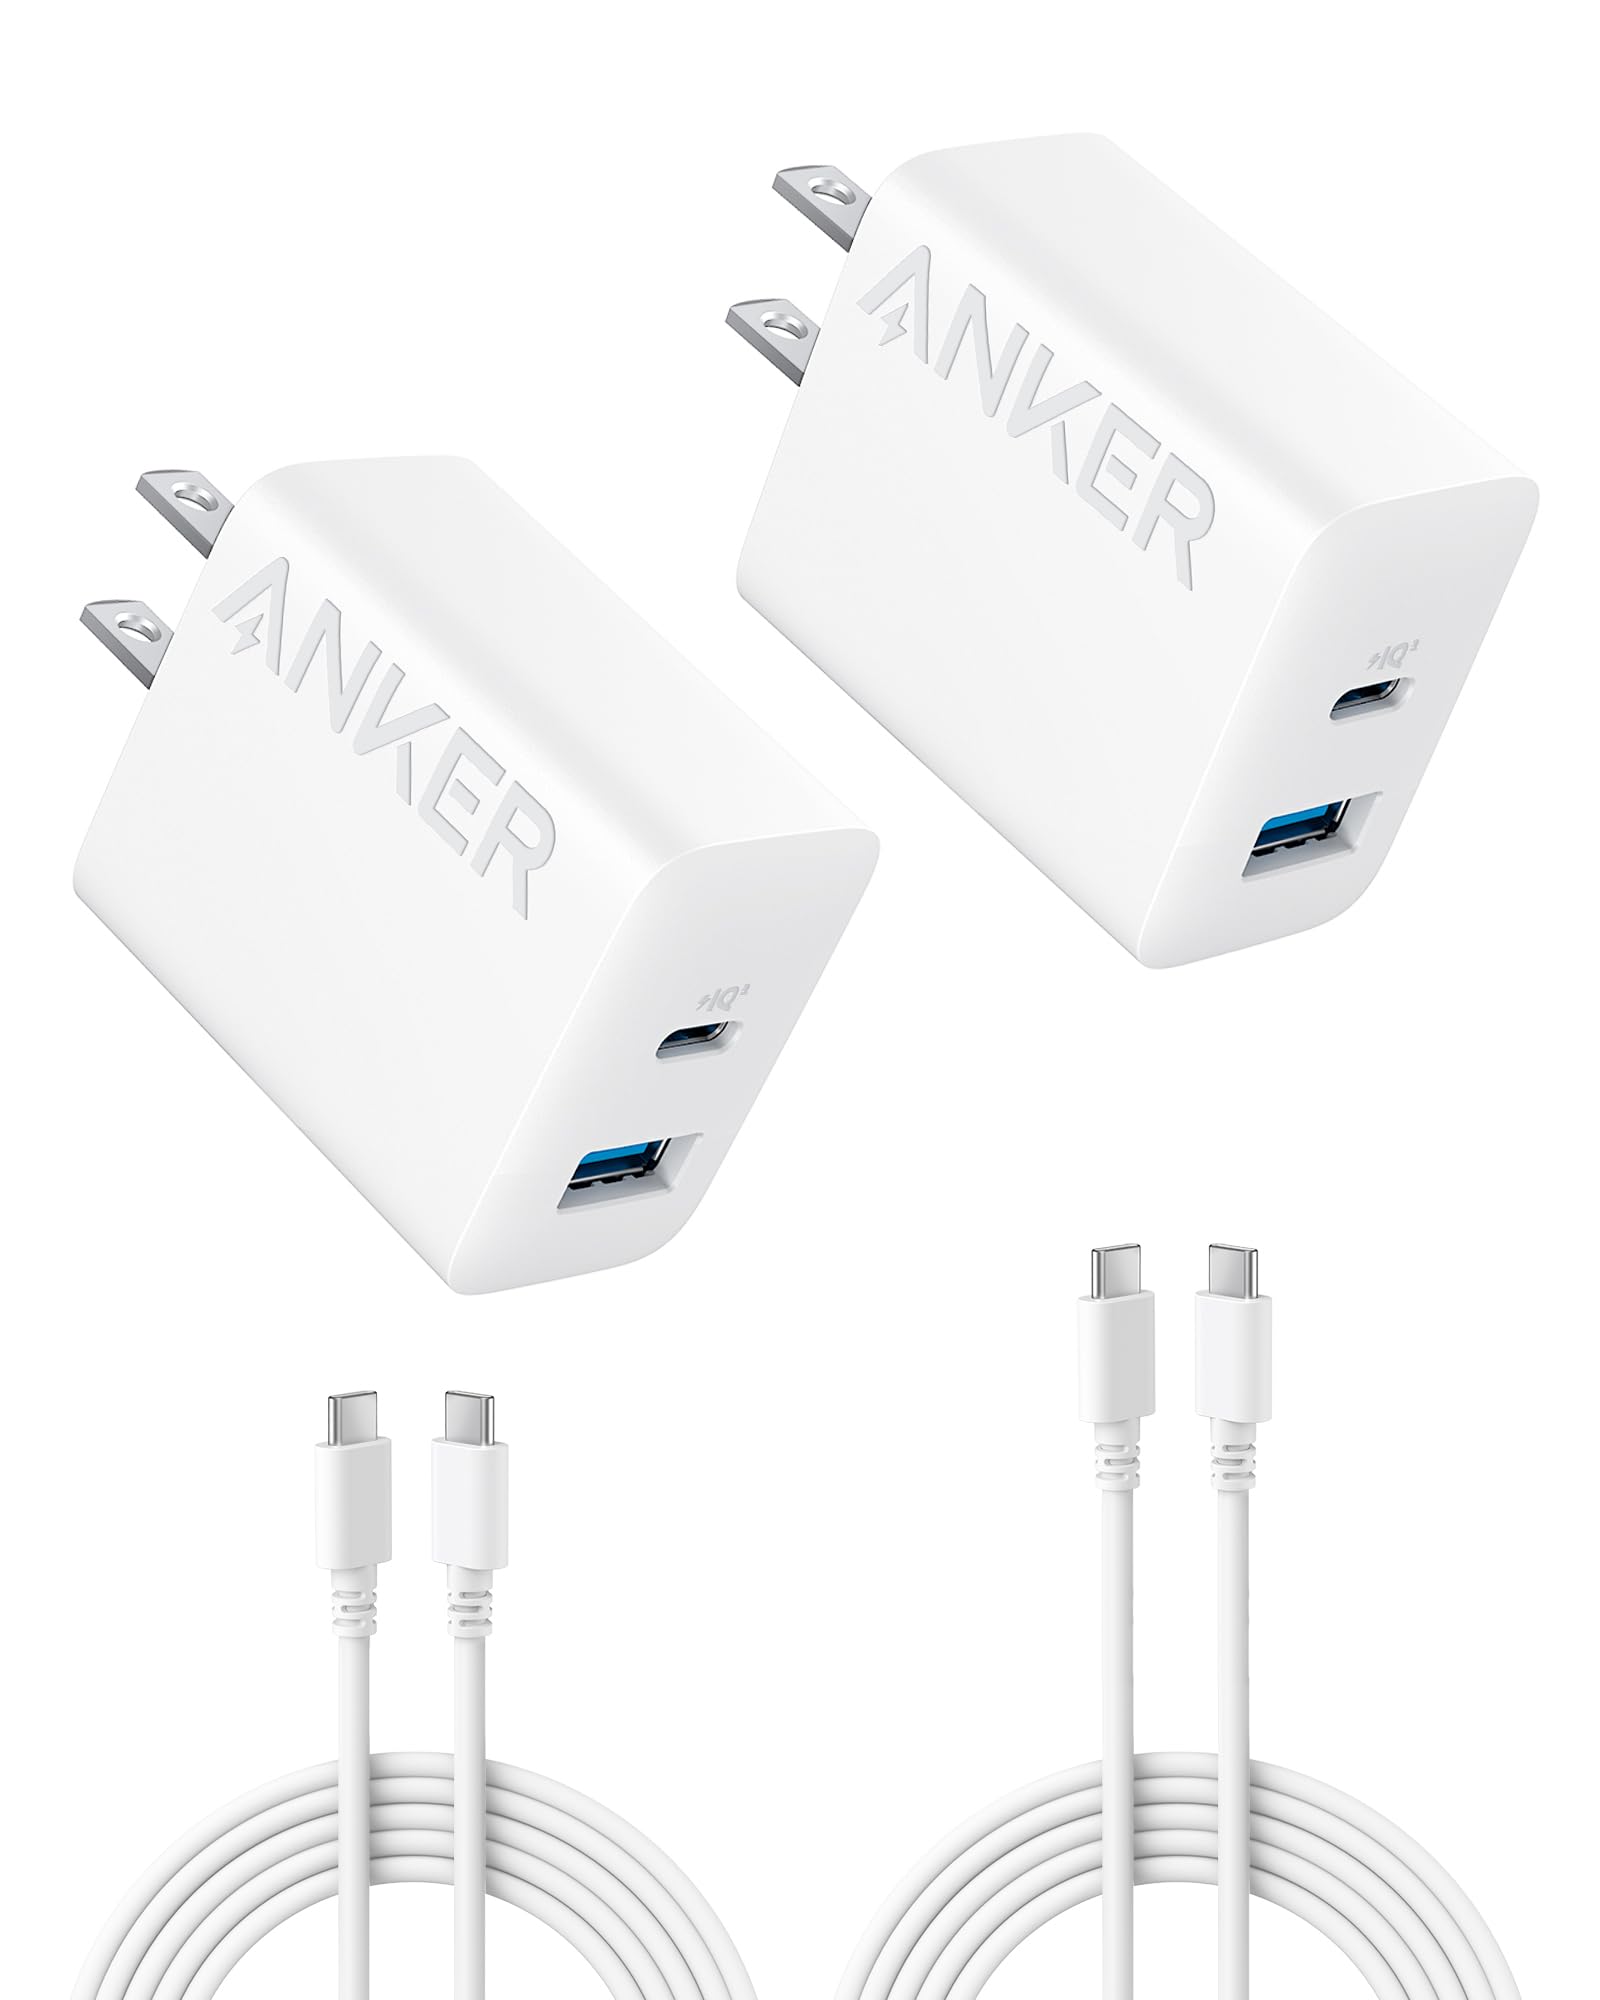 2-Pack Anker 20W 2-Port USB Type-C + Type-A Wall Charger + 2x 5' Type-C Cables $14.39 & More + Free Shipping w/ Prime or on Orders $35+